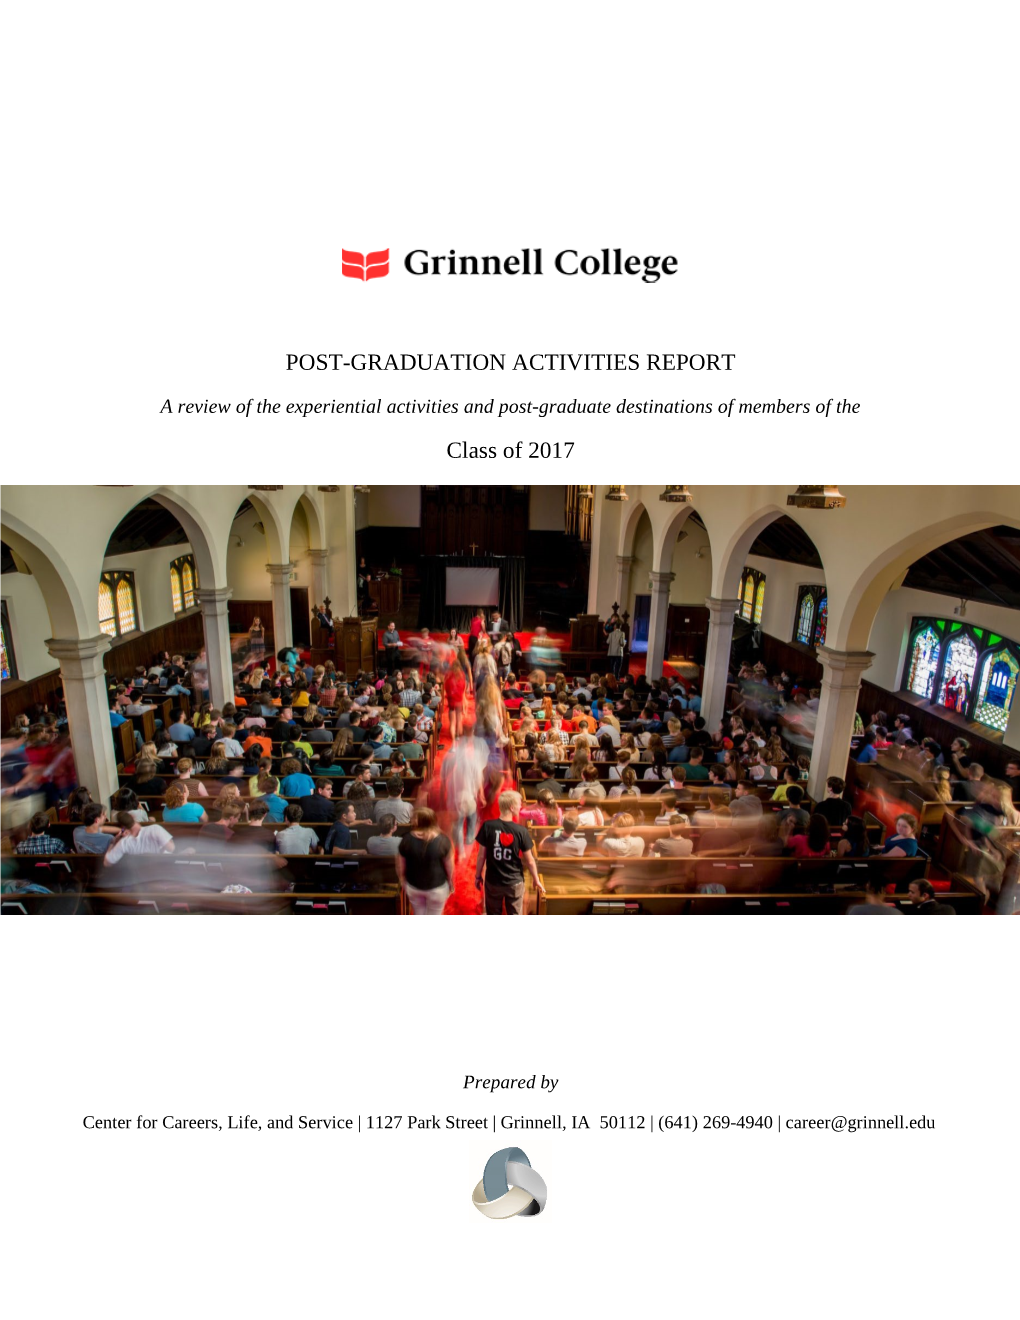 Class of 2017 Post-Graduation Activities Report I Am Pleased to Present the Post-Graduation Activities Report for Members of the Grinnell College Class of 2017